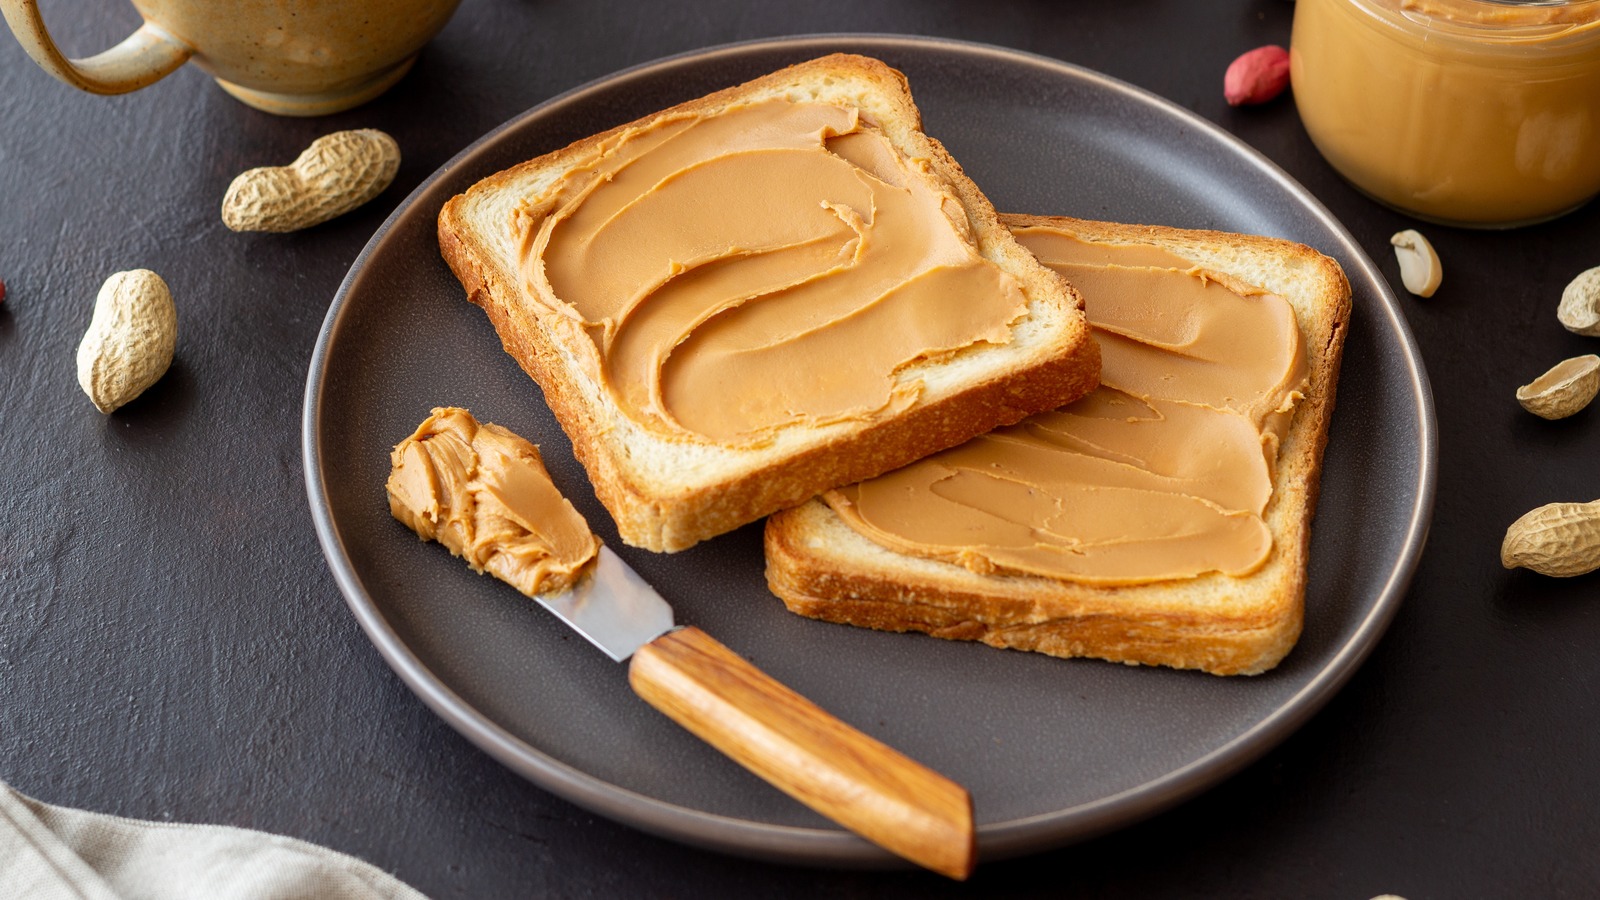 https://www.thedailymeal.com/img/gallery/11-of-the-unhealthiest-store-bought-peanut-butters/l-intro-1698439499.jpg